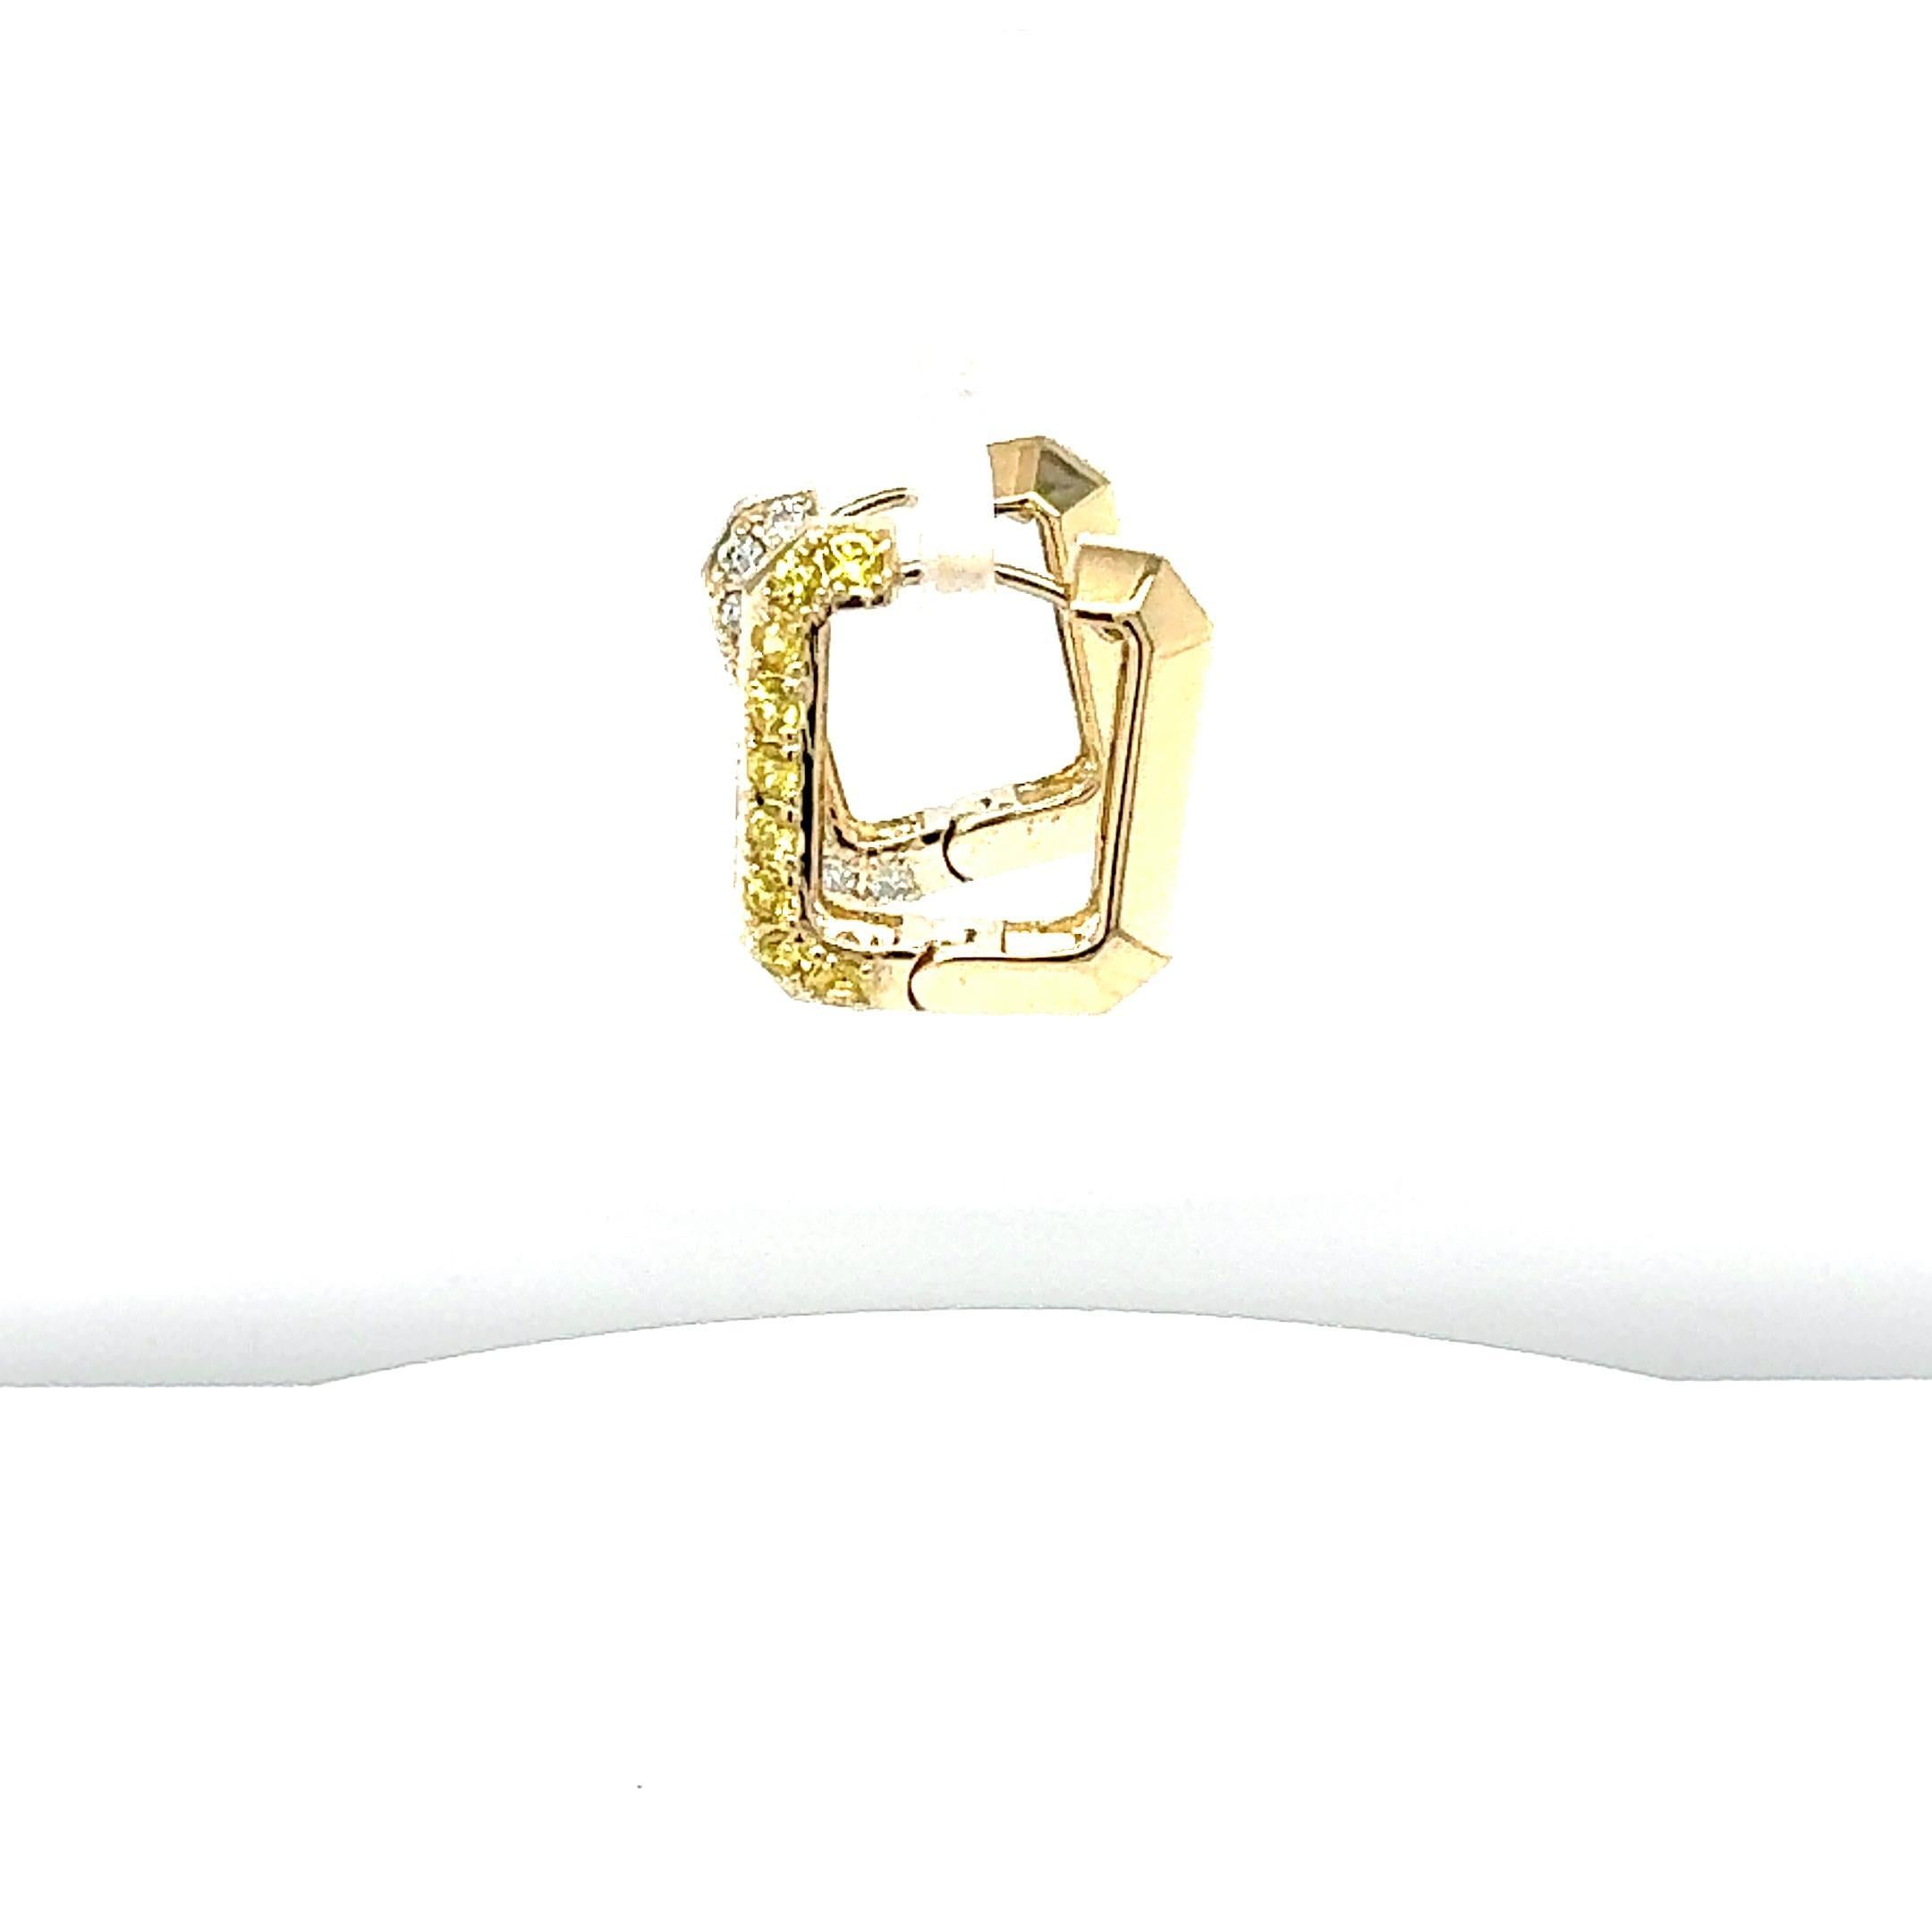 1.16 Carat Diamond Yellow Sapphire Gold Hoop Earrings In New Condition For Sale In Los Angeles, CA